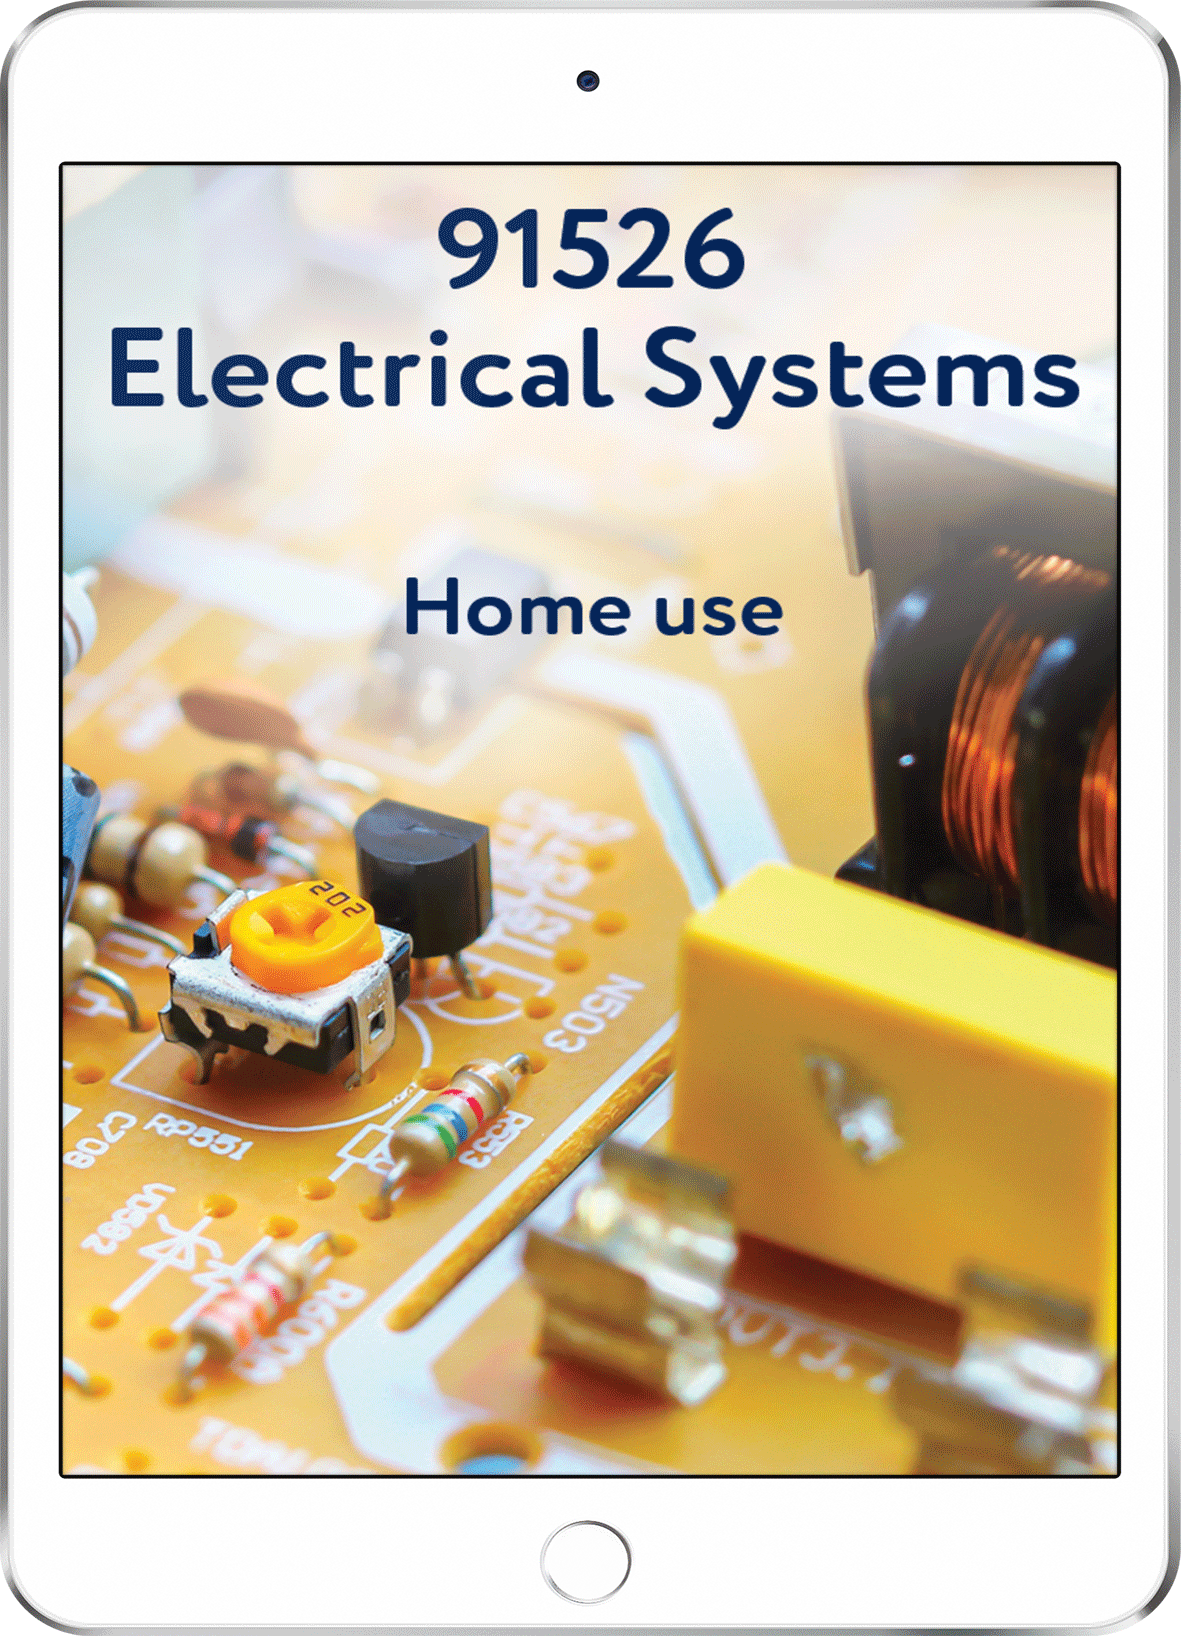 91526 Electrical Systems - Home Use